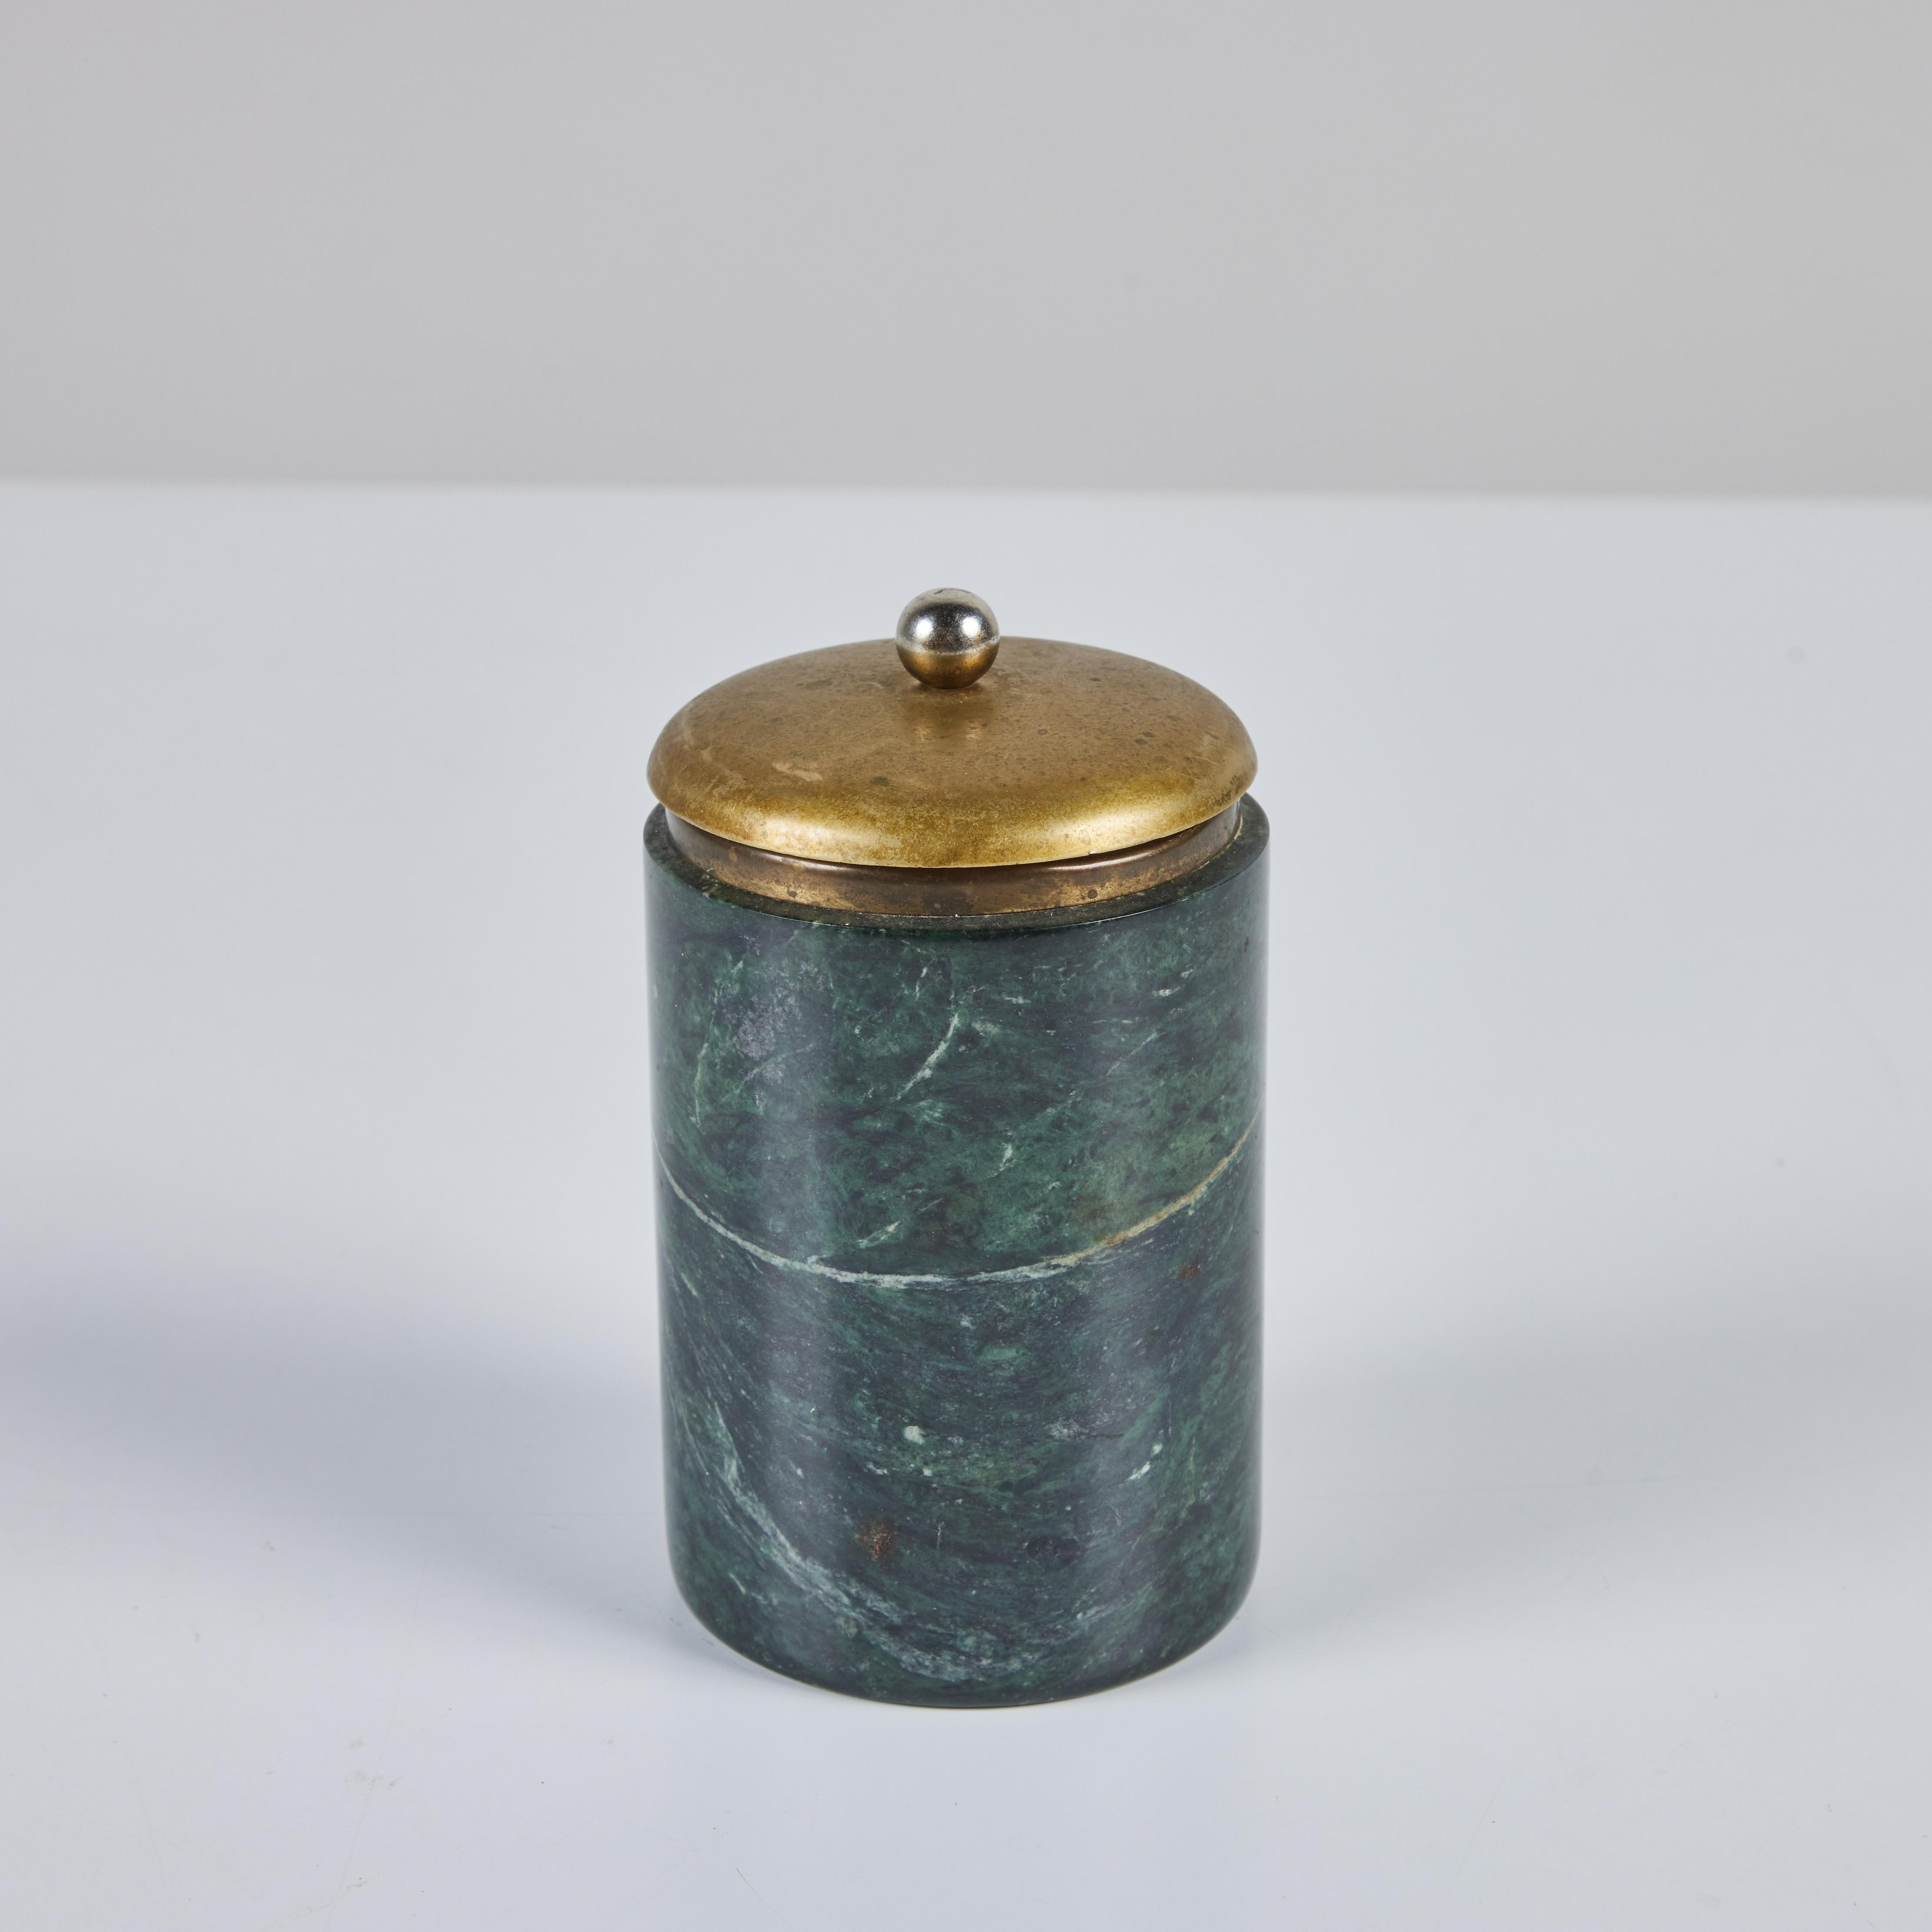 Green marble canister with cream veining features a brass and stainless steel lid. Originally a cigarette holder, it would be perfect for it's intended use or a vessel for q-tips or other trinkets.

Dimensions
3